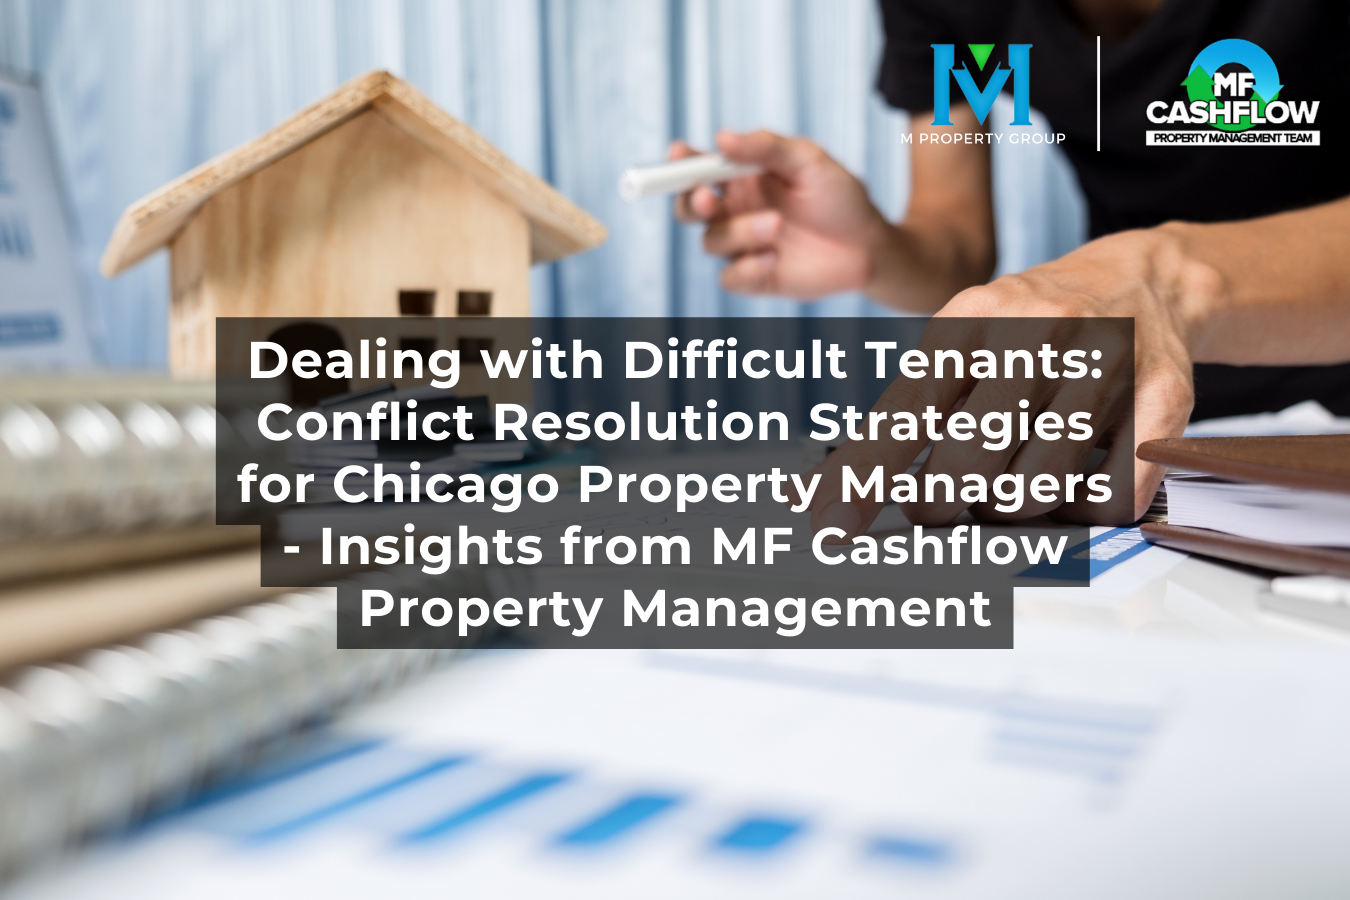 Dealing with Difficult Tenants: Conflict Resolution Strategies for Chicago Property Managers - Insights from MF Cashflow Property Management